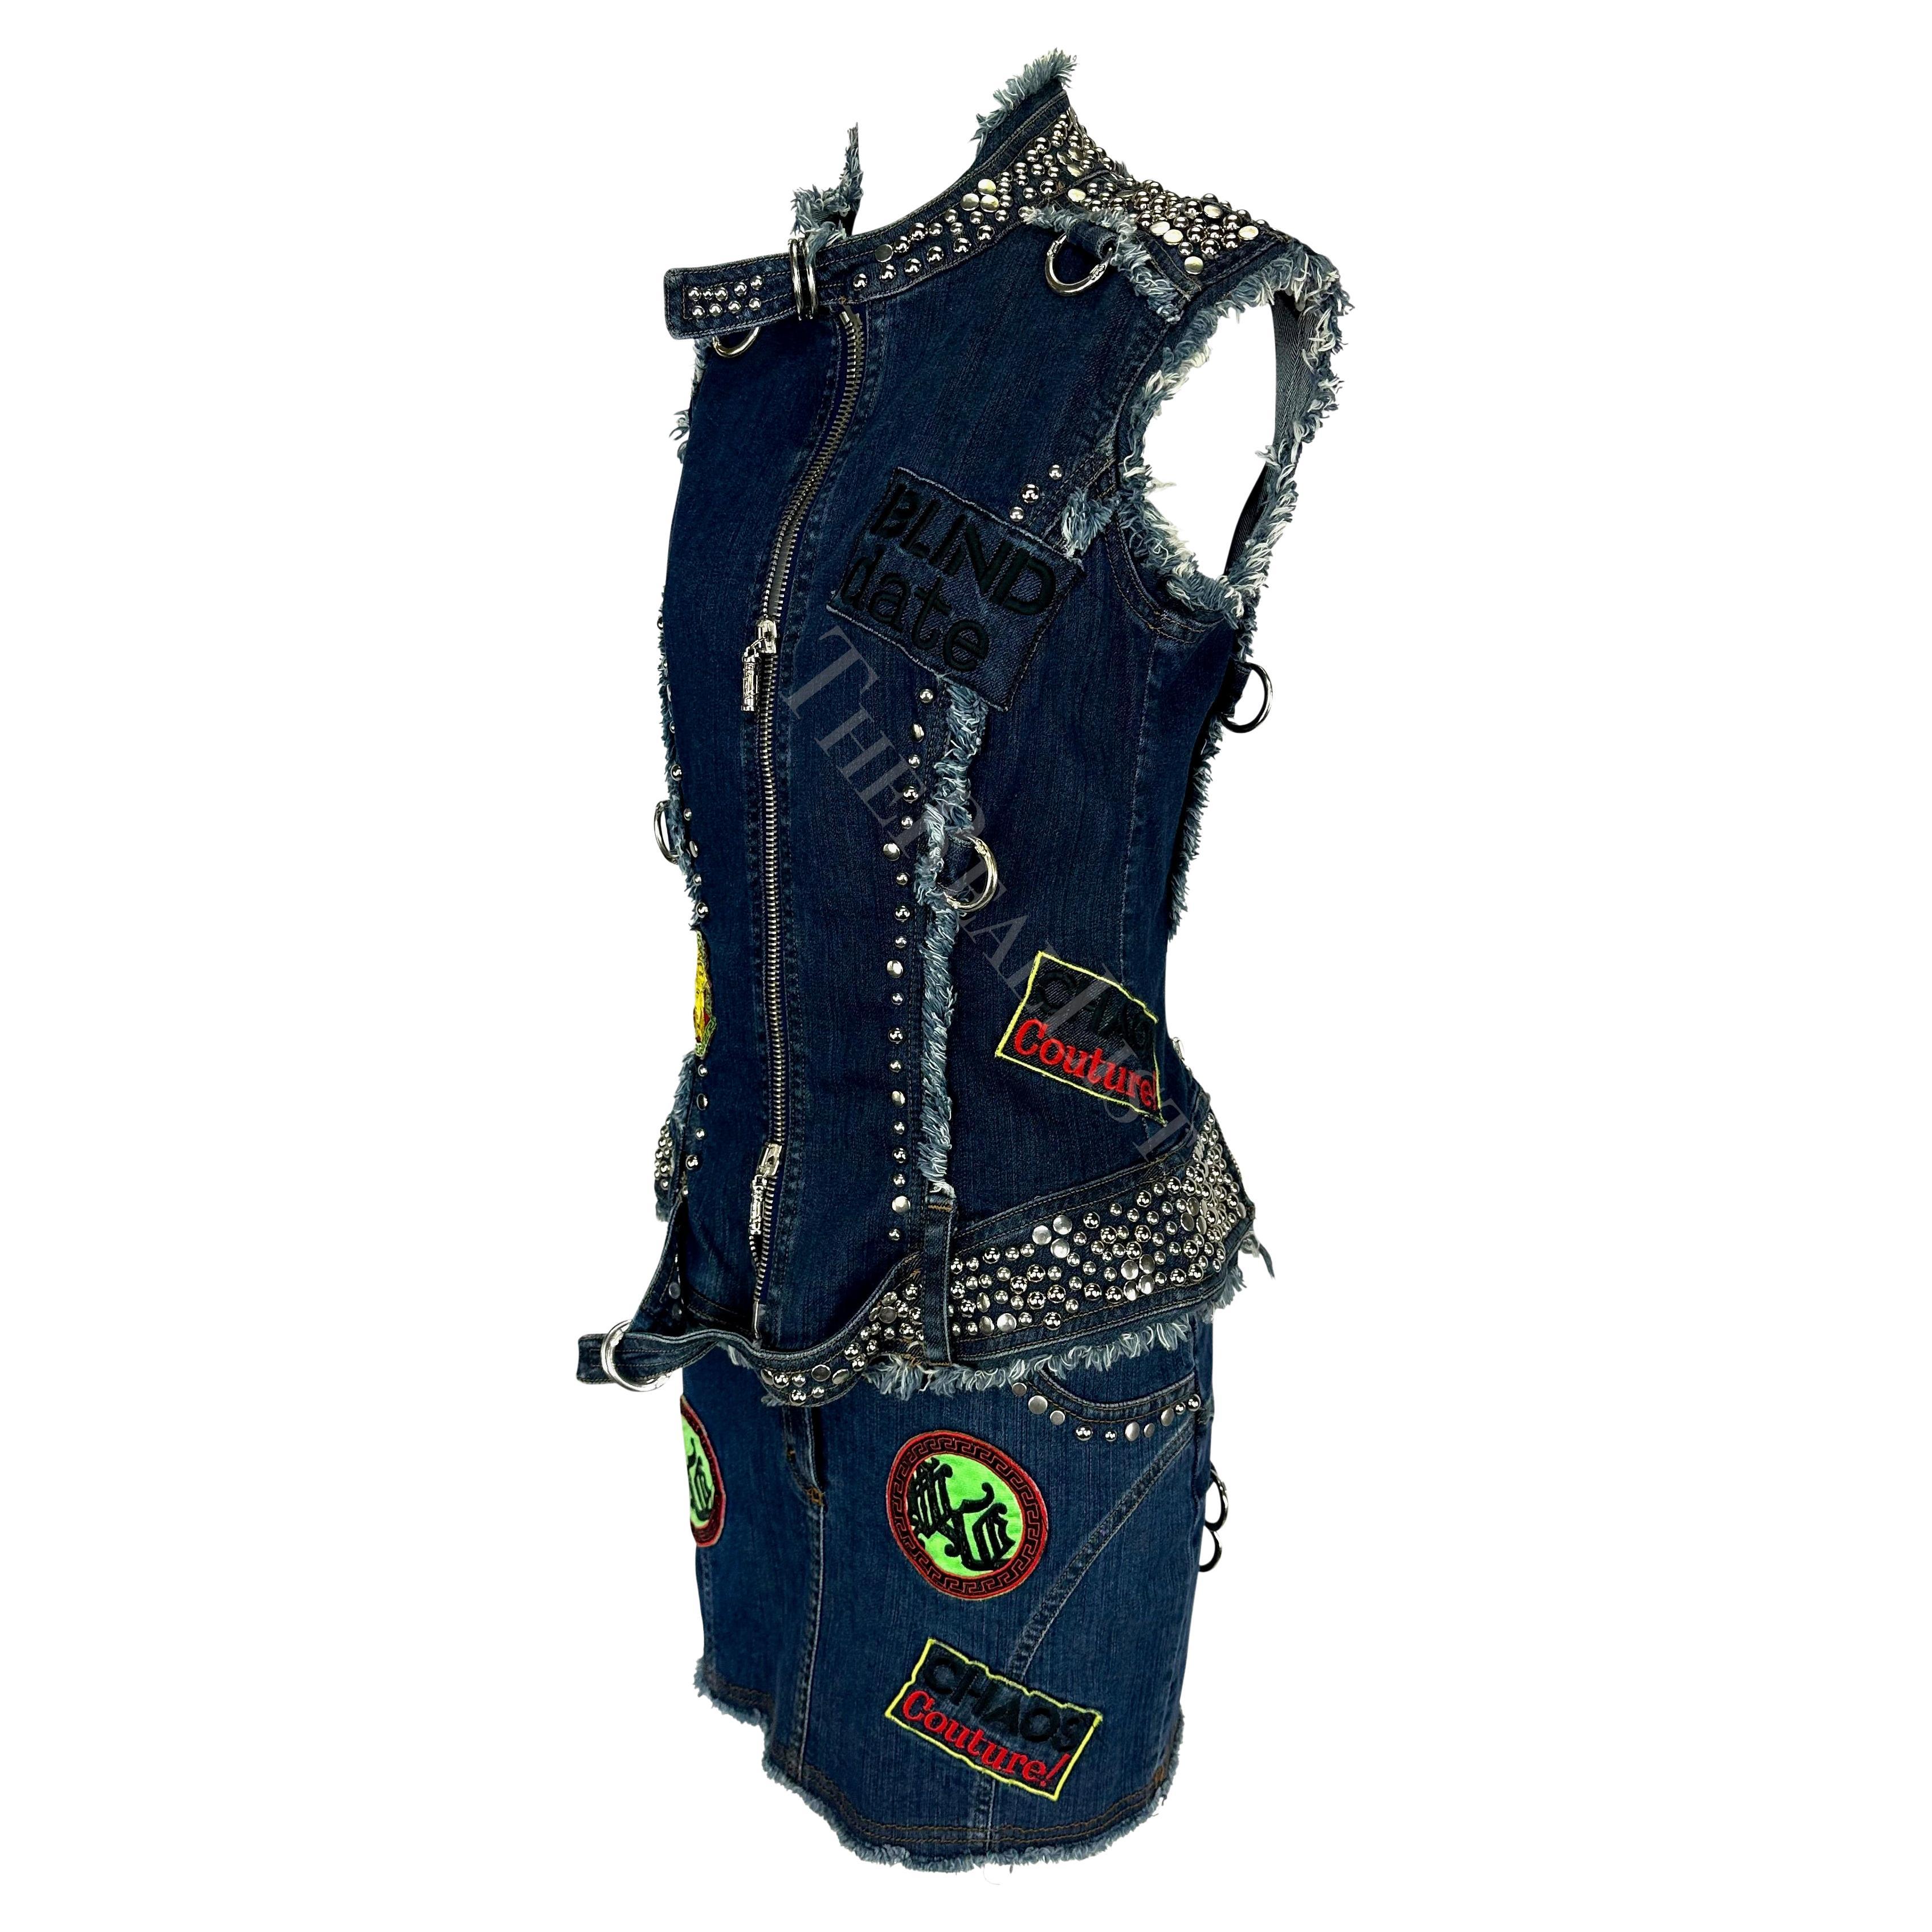 S/S 2005 Versace by Donatella Chaos Couture Studded Denim Patch Vest Skirt Set For Sale 3